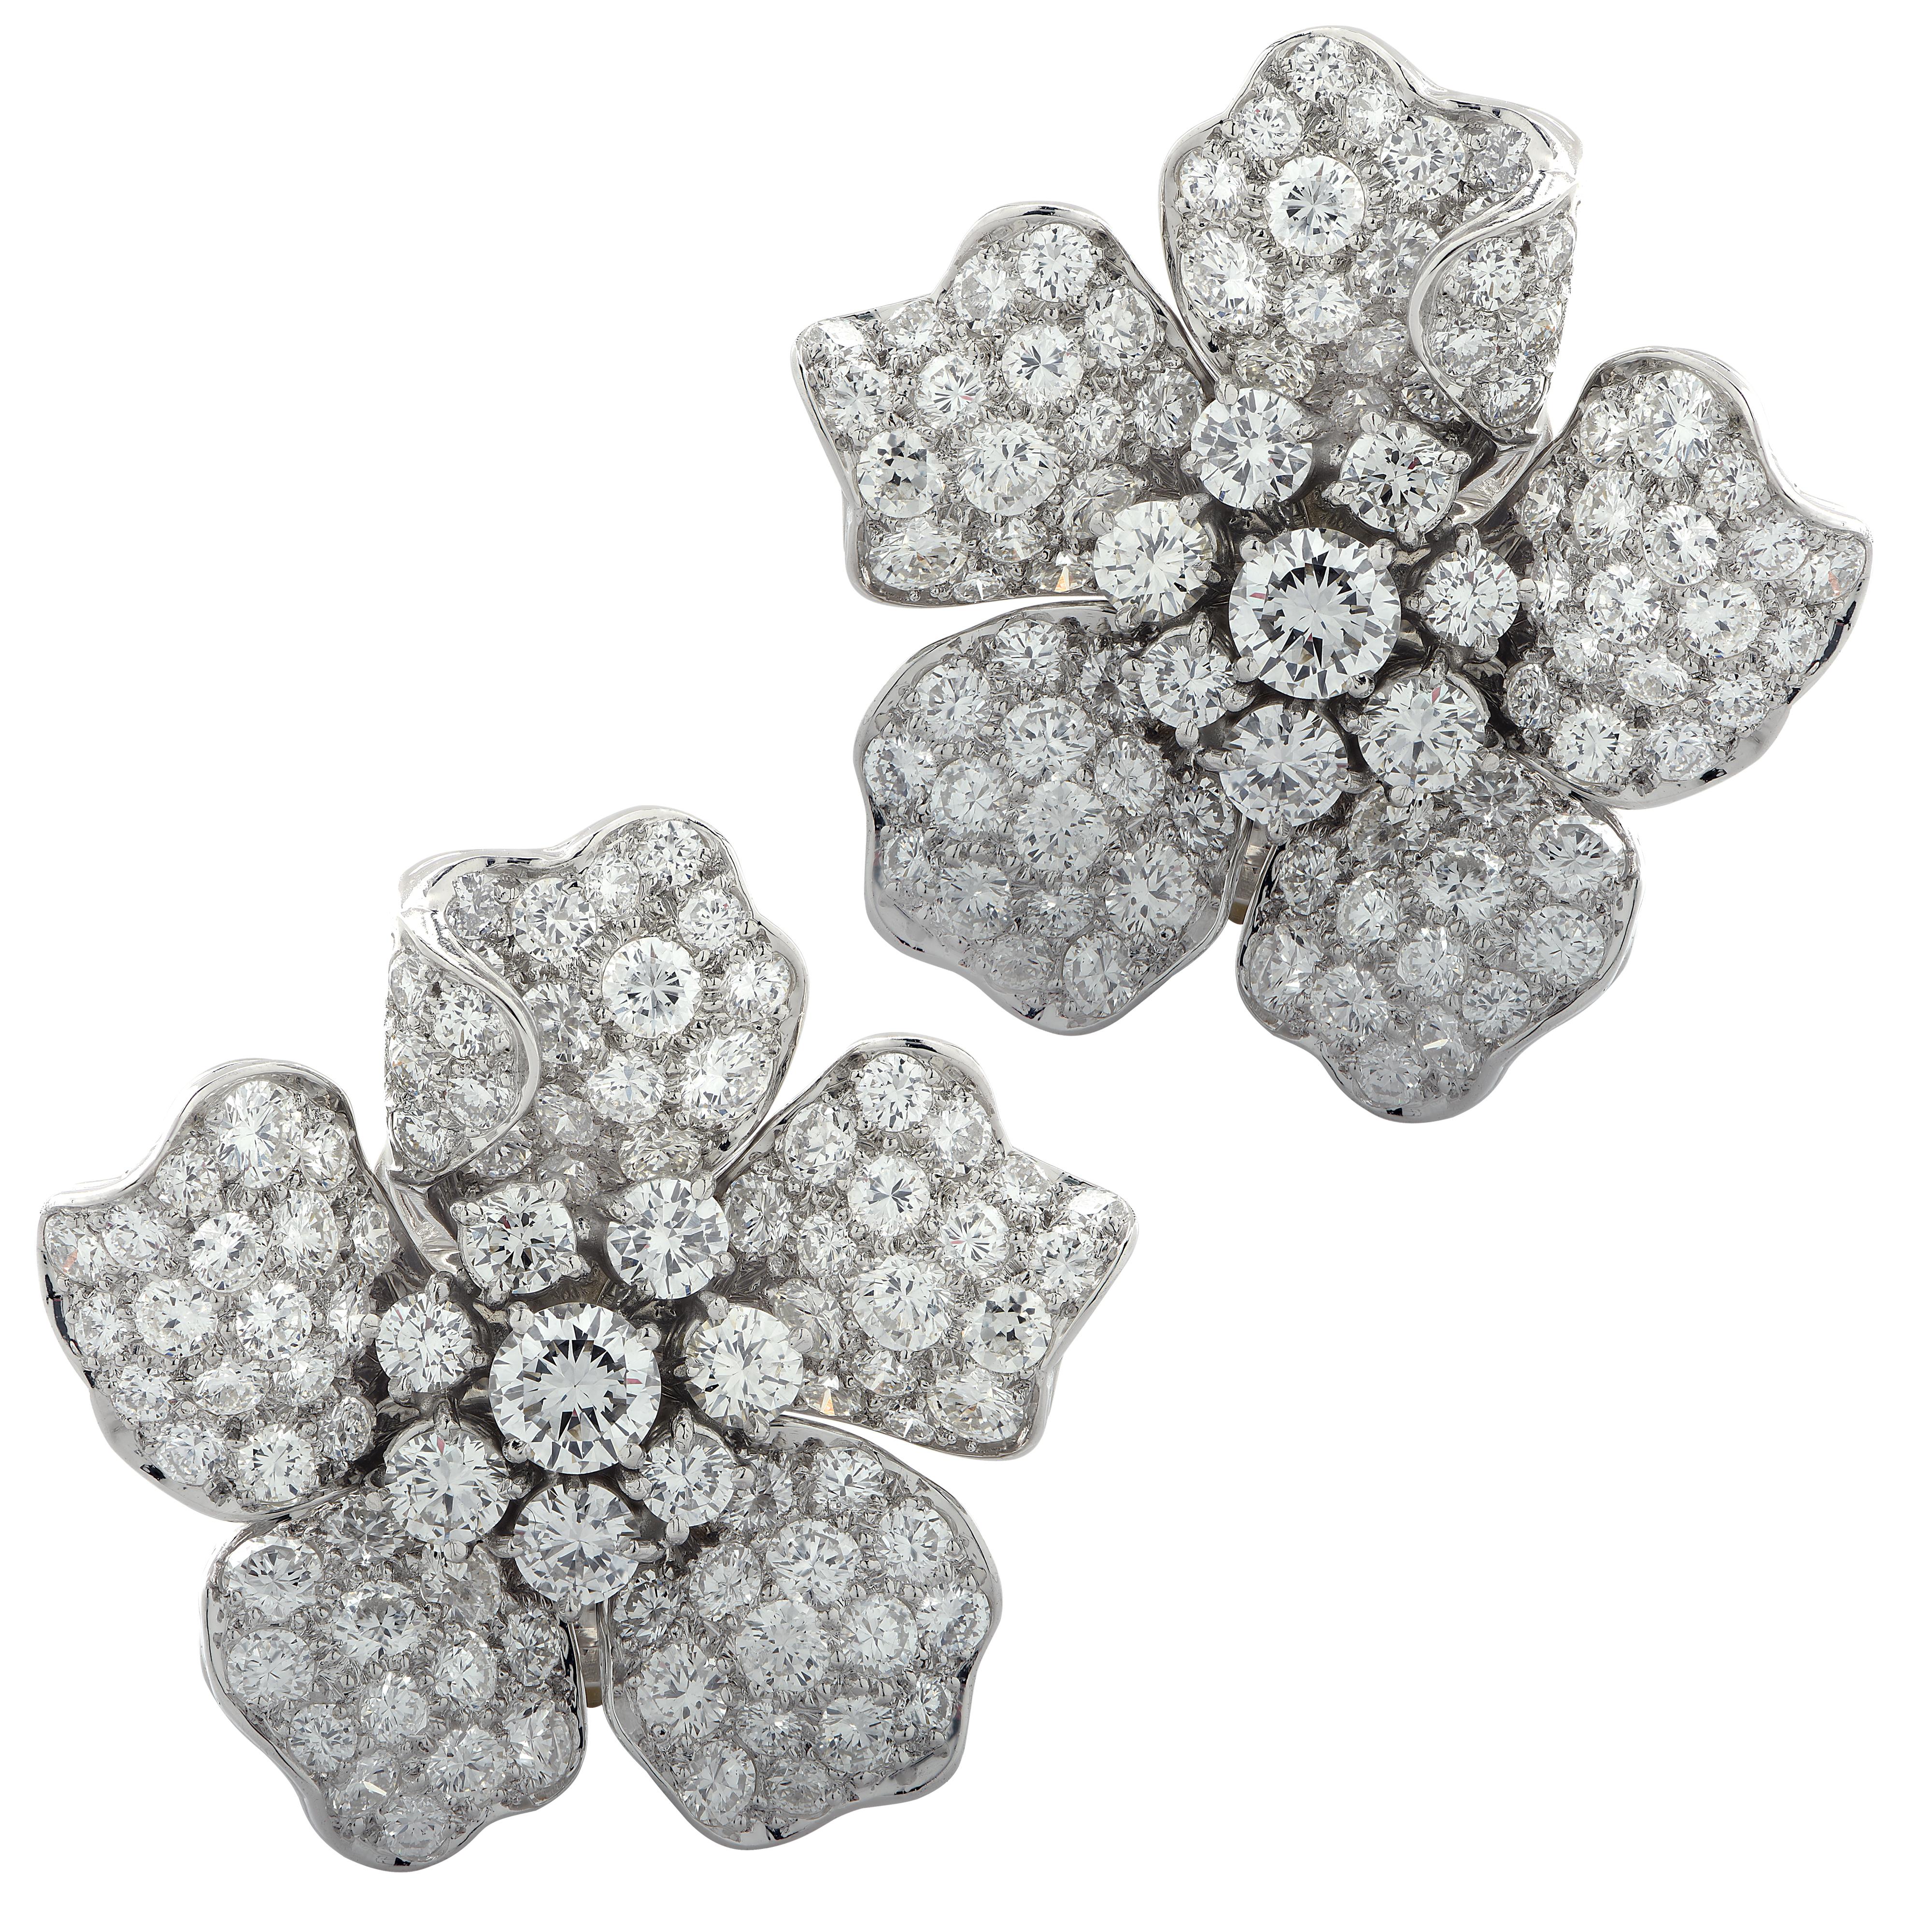 Midcentury Diamond Encrusted Platinum Flower Earrings In Excellent Condition For Sale In Miami, FL